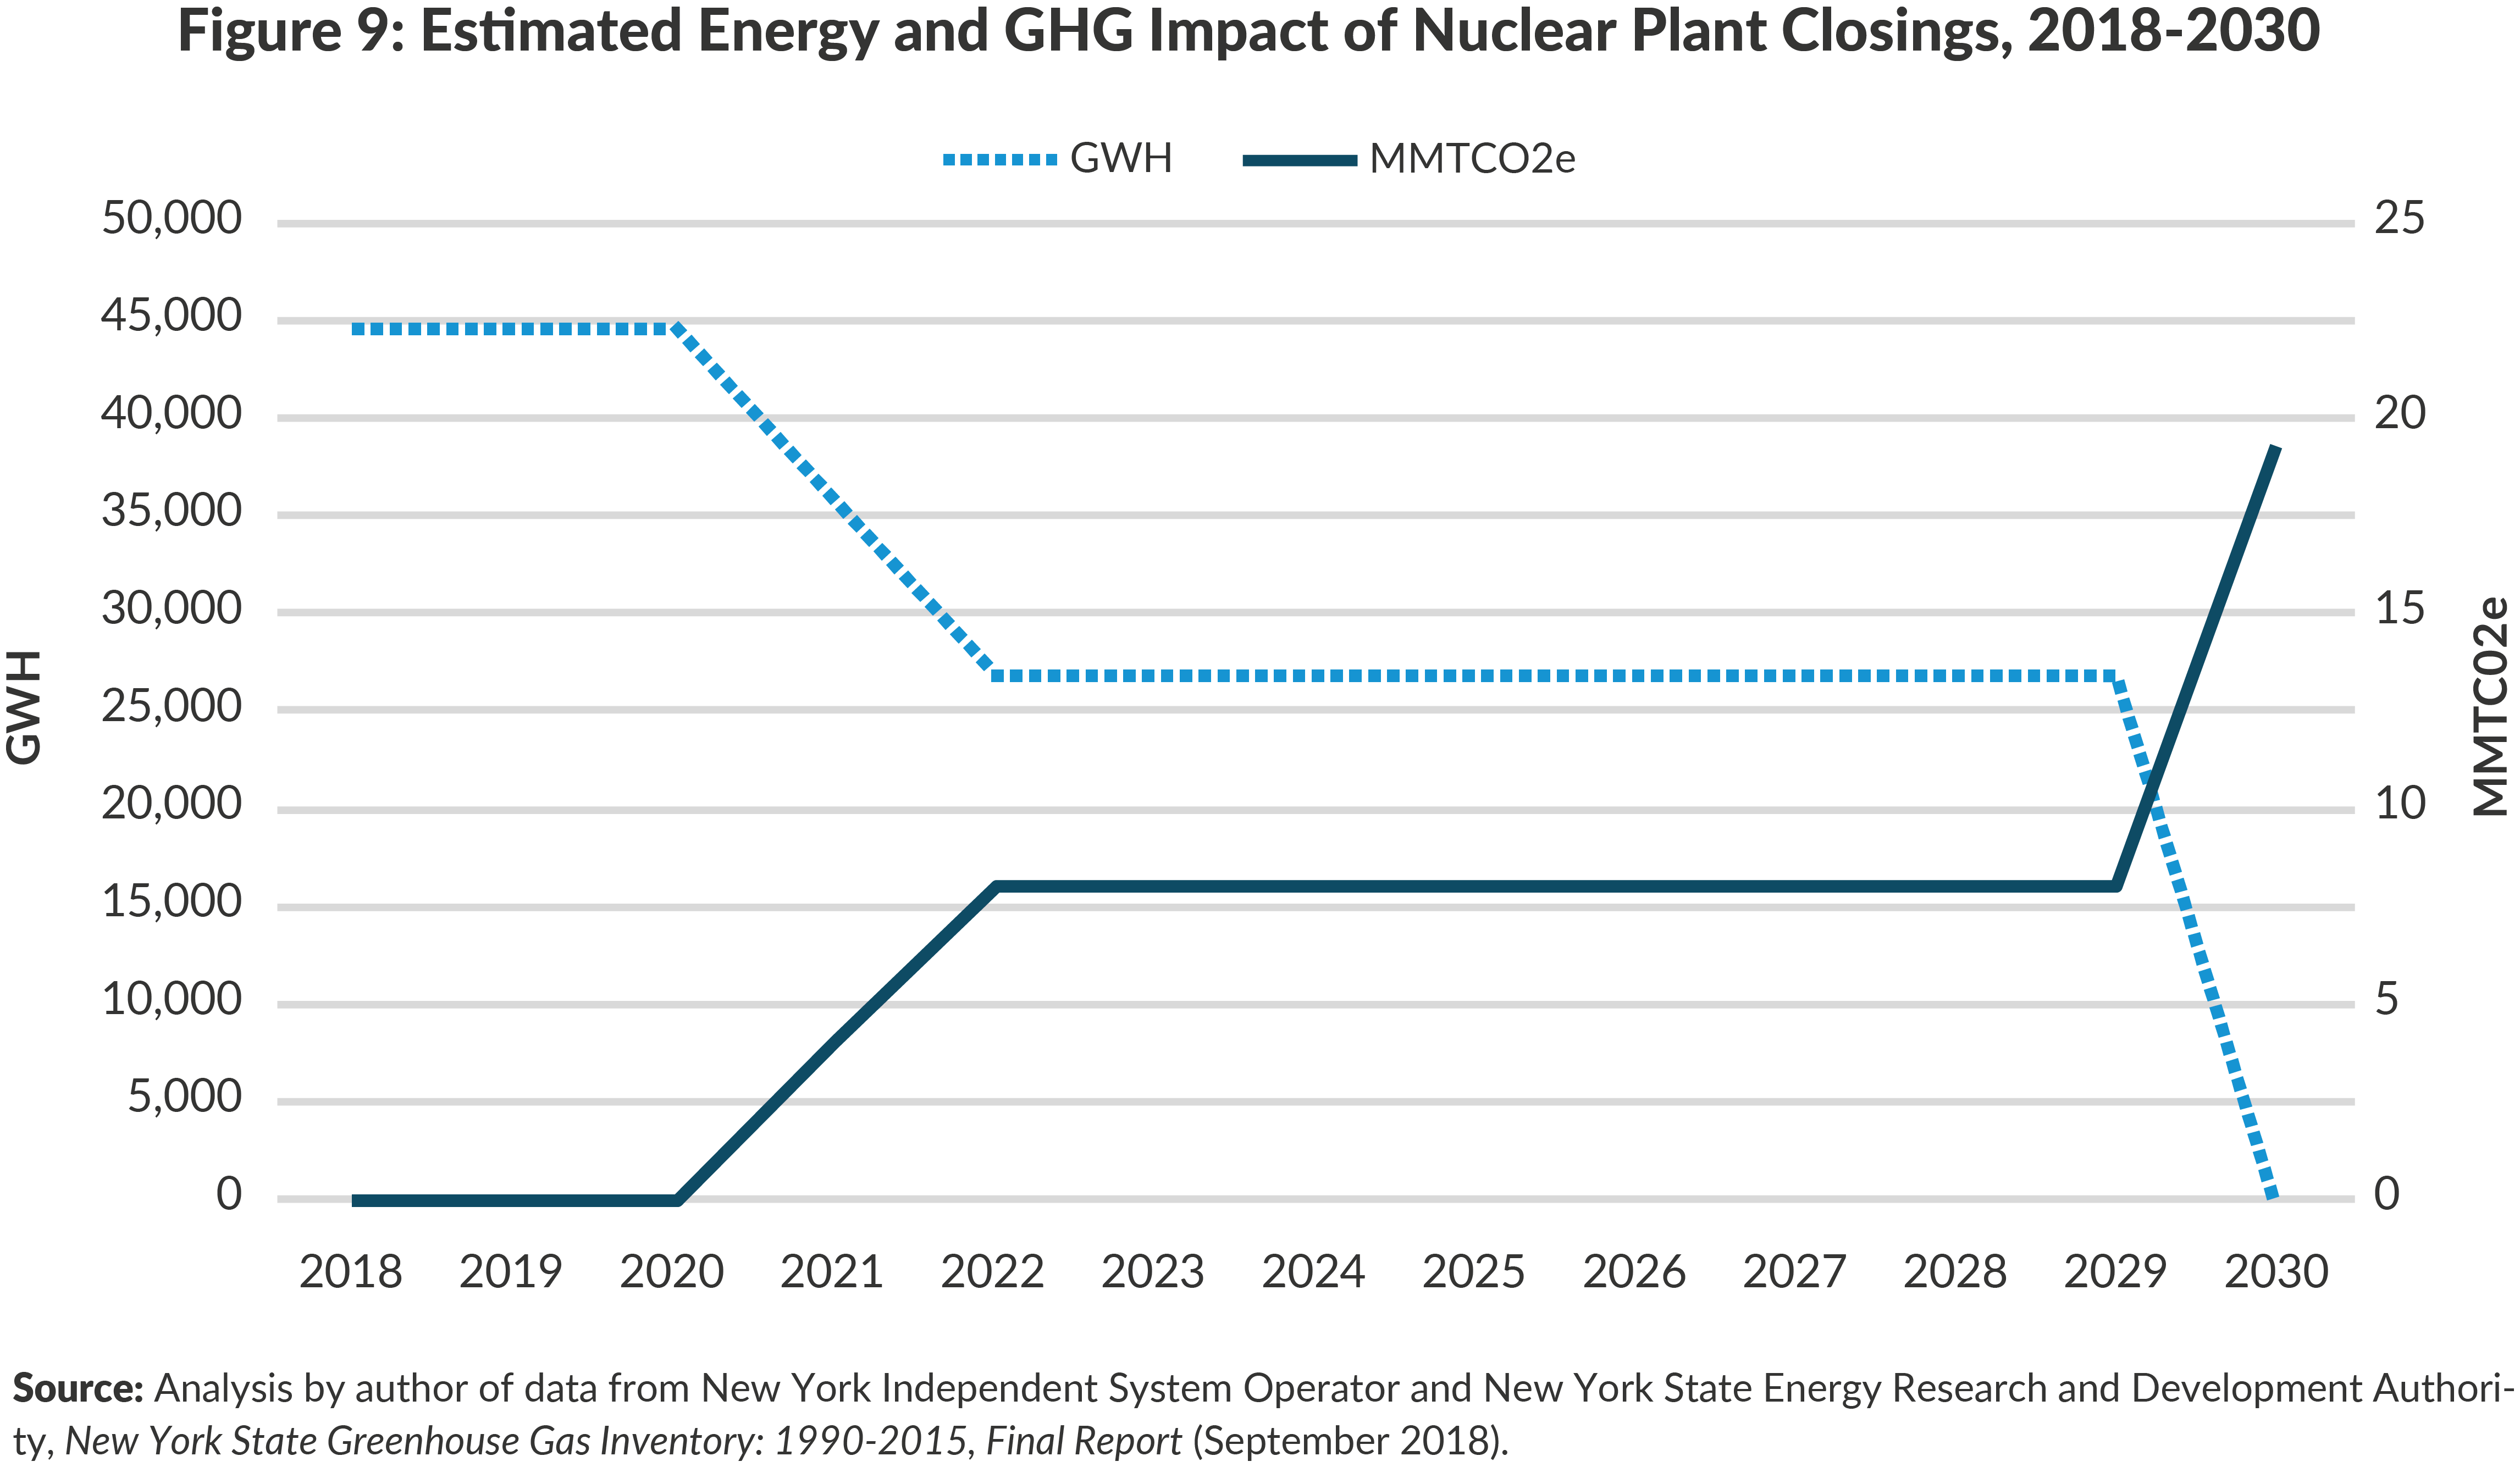 Figure 9: Estimated Energy and GHG Impact of Nuclear Plant Closings, 2018-2030